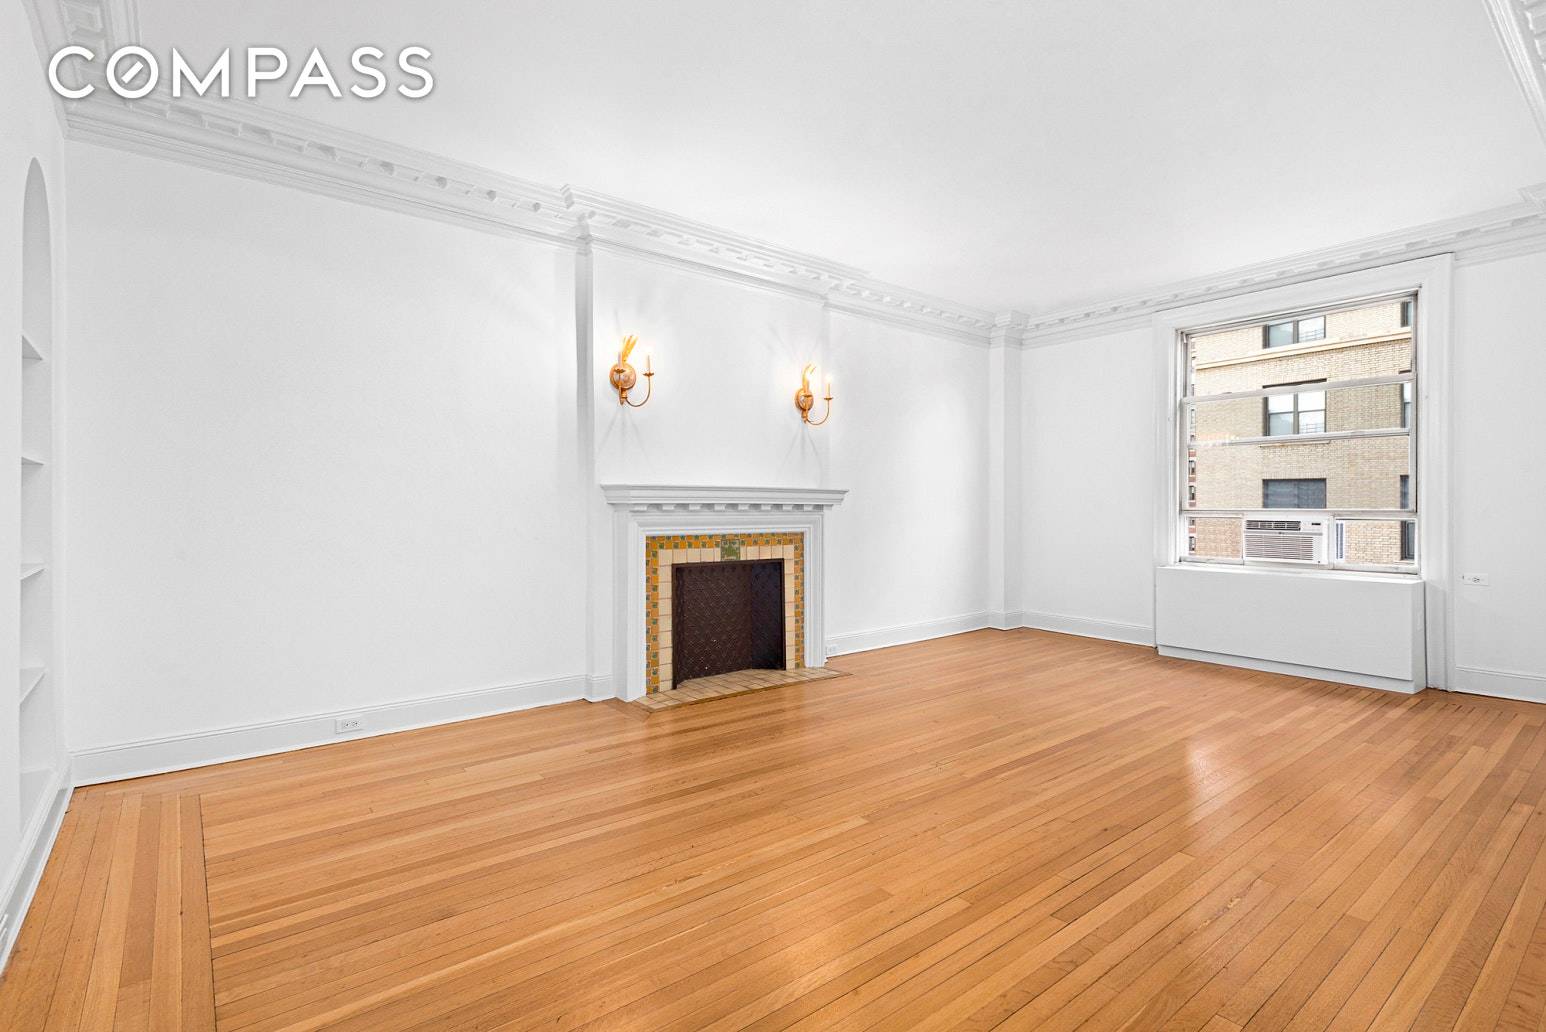 This newly renovated, impeccable 2 bed 1 bath prewar condo on the Upper West Side features high ceilings, decorative fireplace in the grand oversized living room, large windows, hardwood oak ...